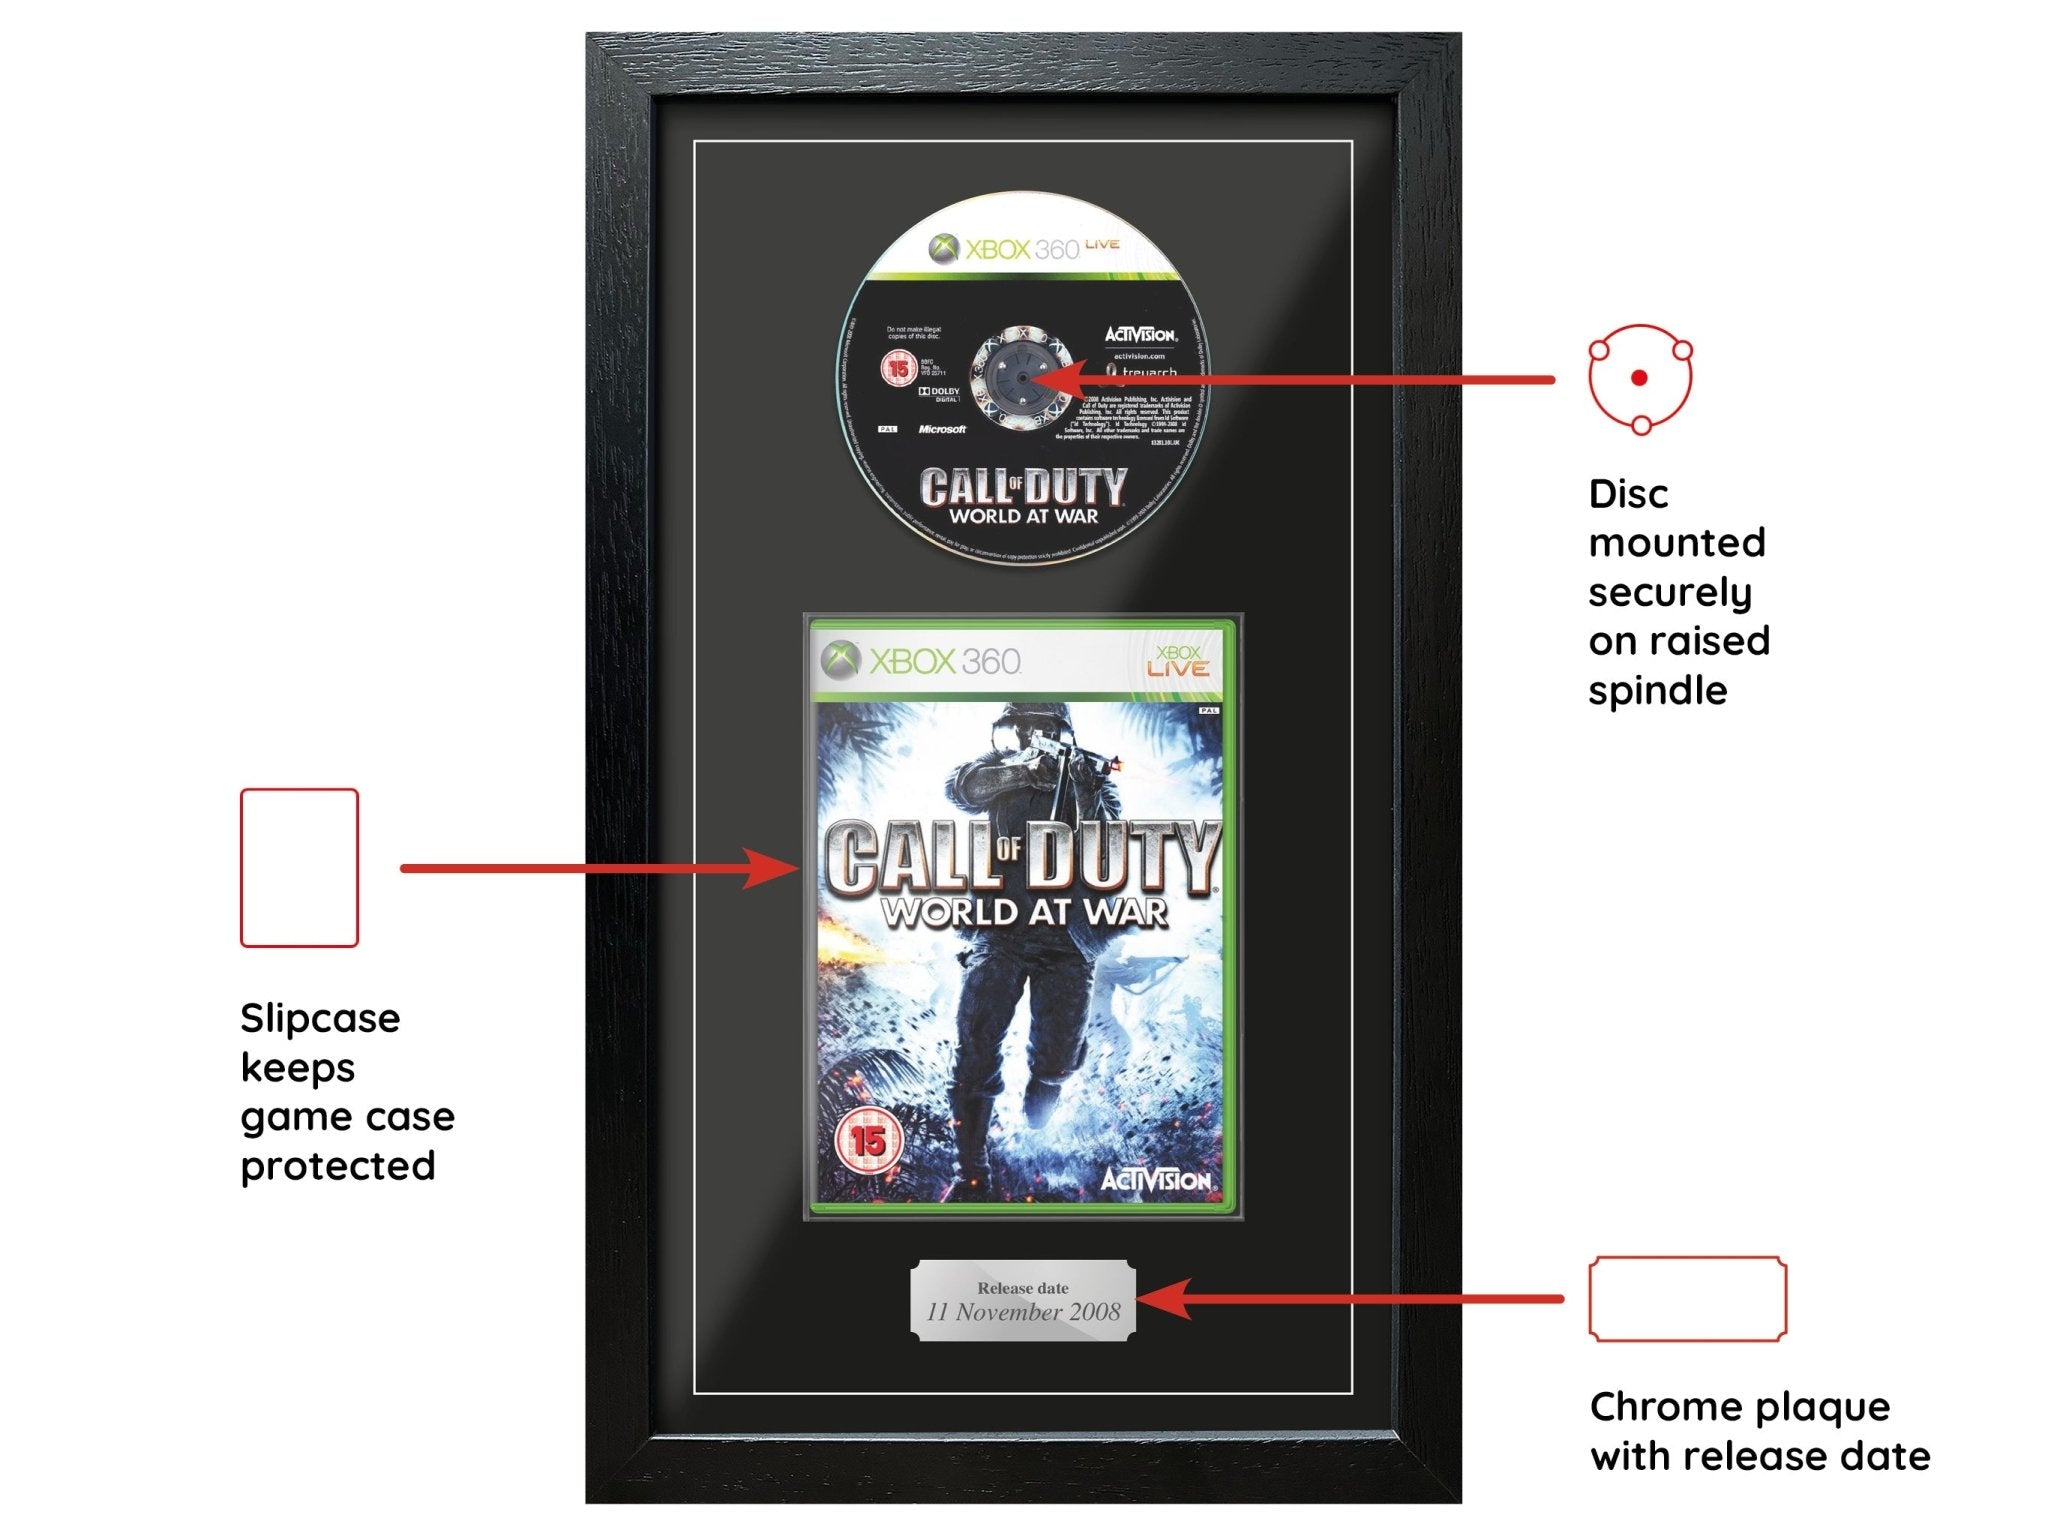 Call of Duty: World At War (Xbox 360) Exhibition Range Framed Game - Frame-A-Game